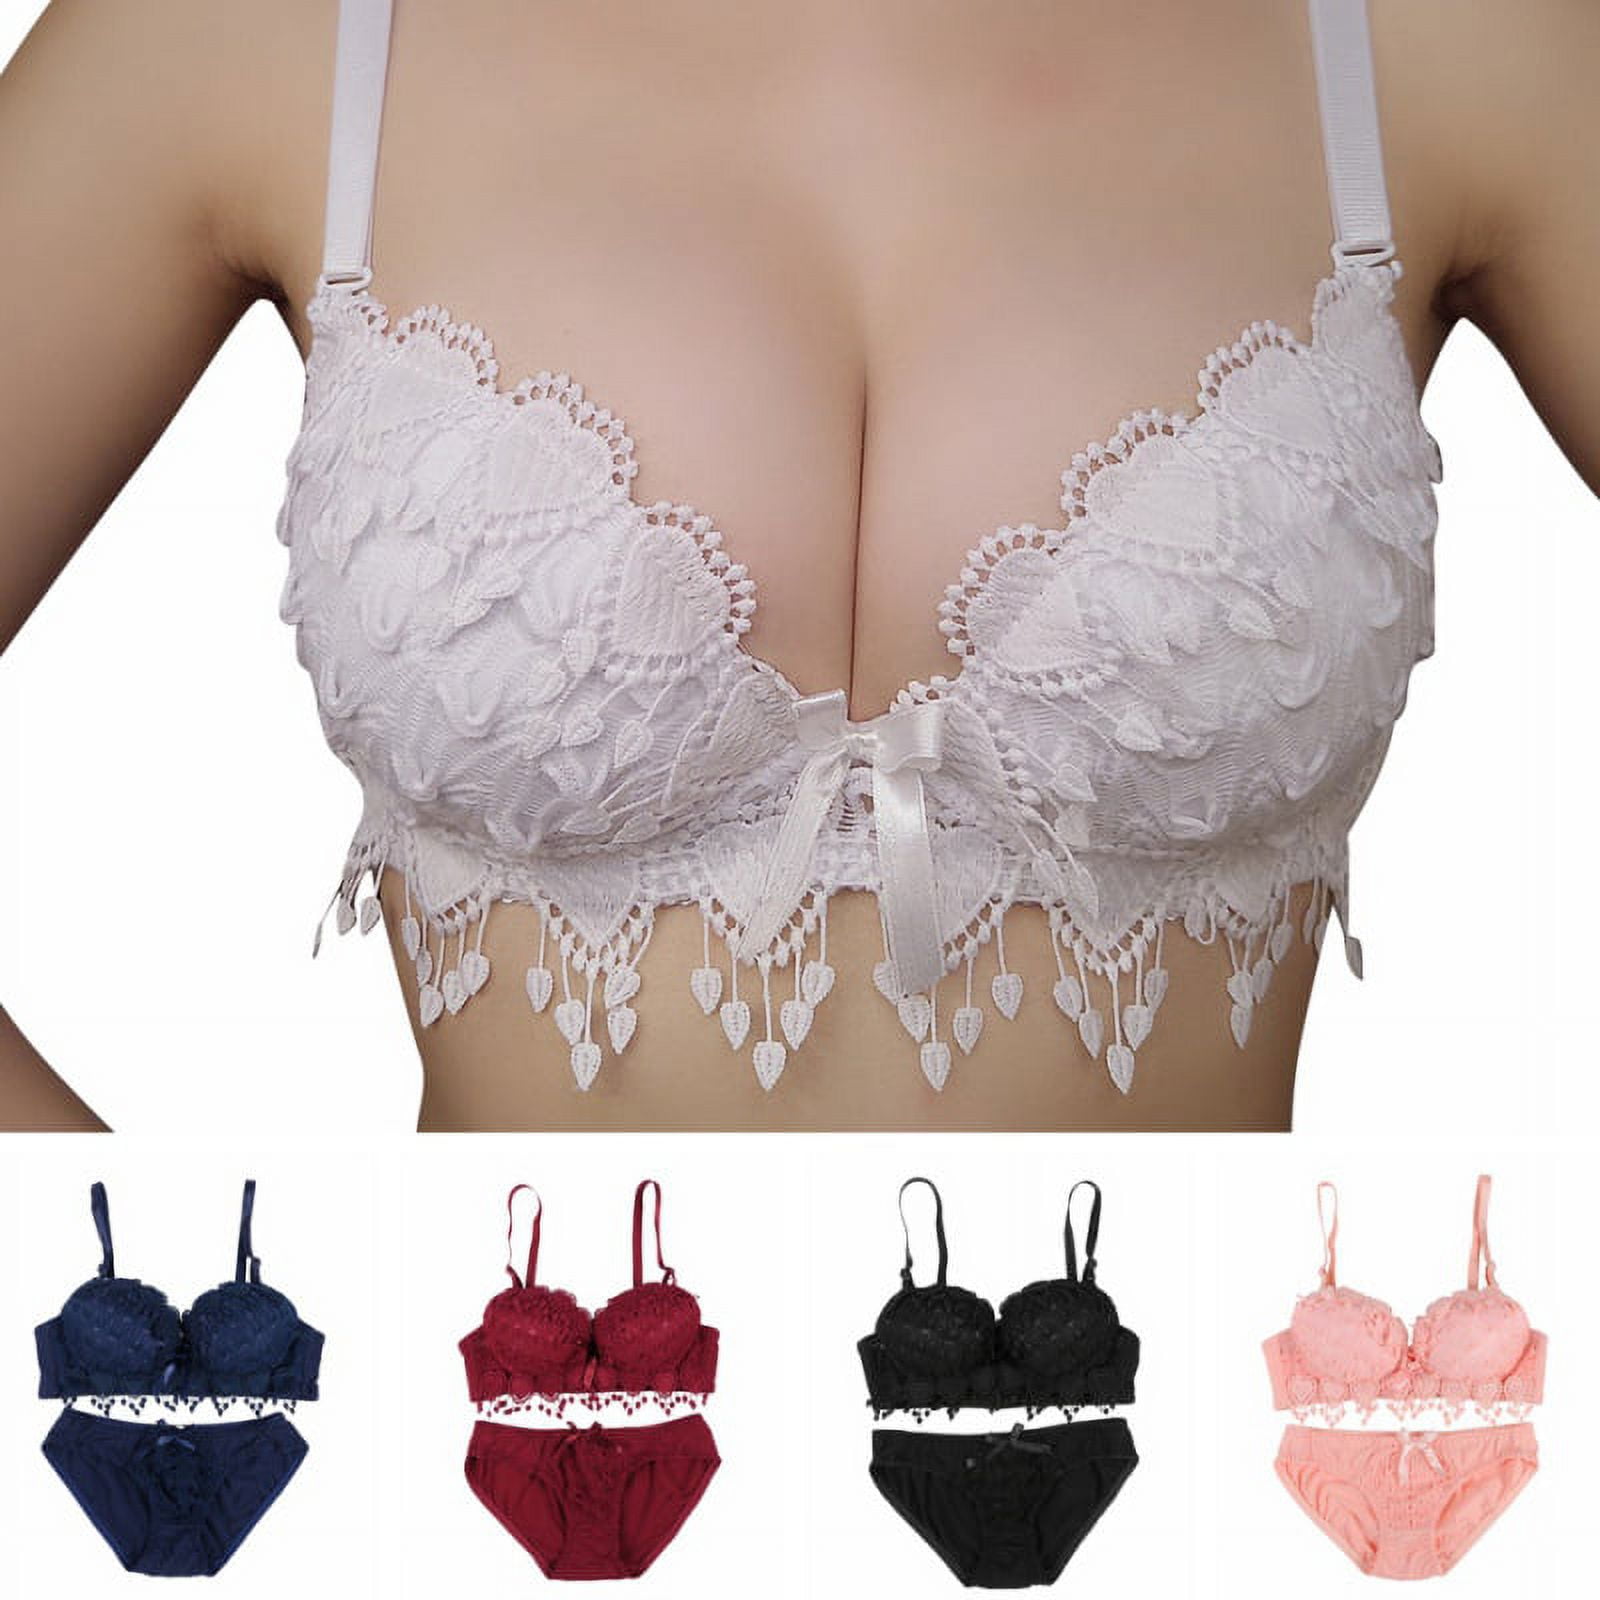 Vintage Women's Push Up Embroidery Bras Set Lace Lingerie Bra and Panties